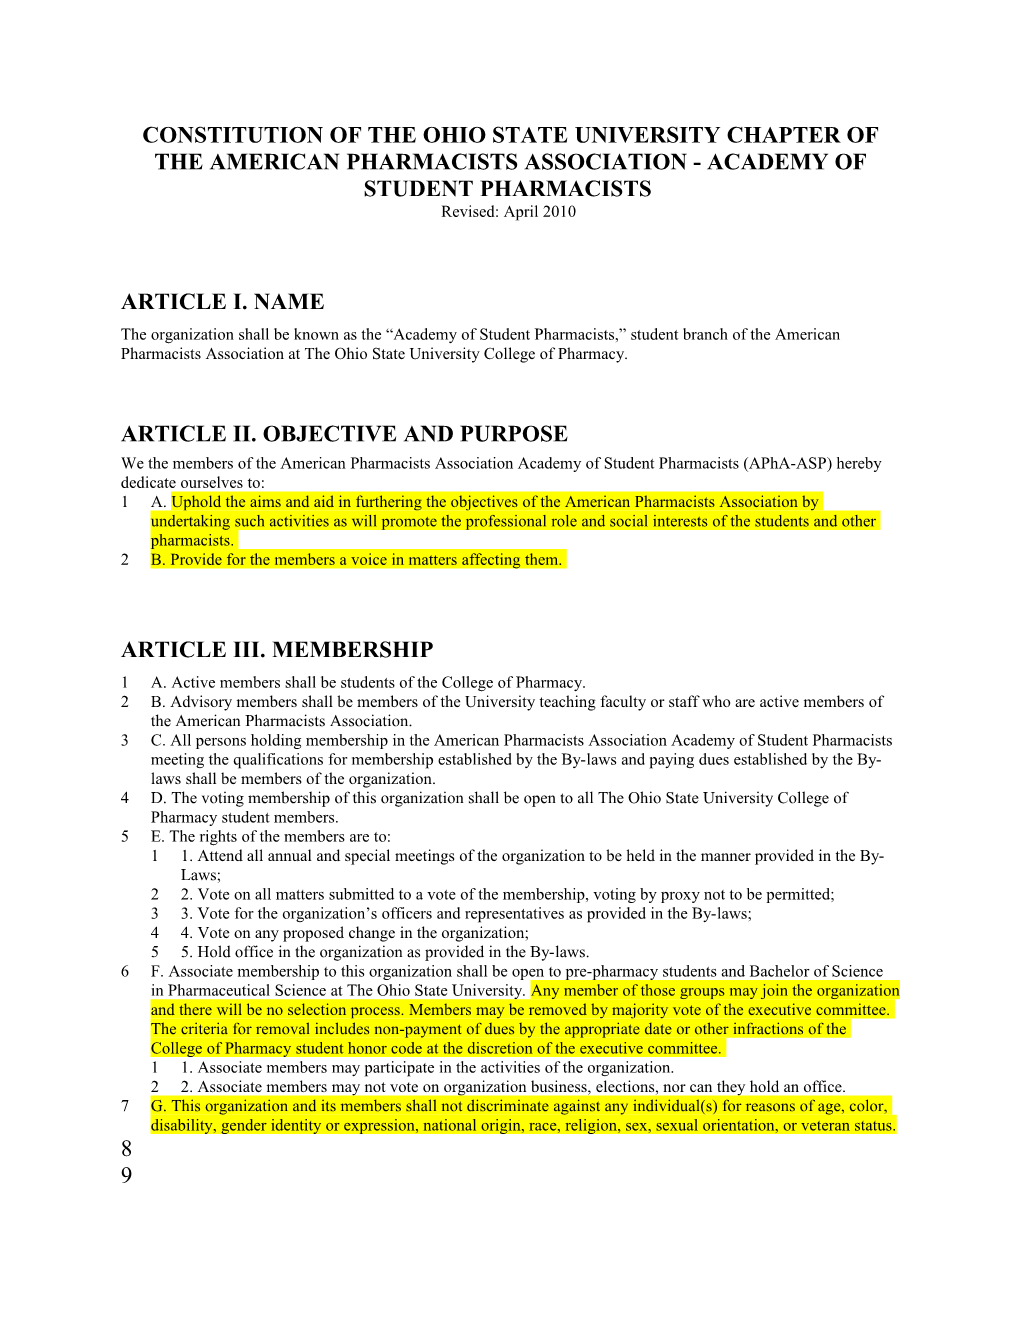 Constitution of the Ohio State University Chapter of the American Pharmacists Association